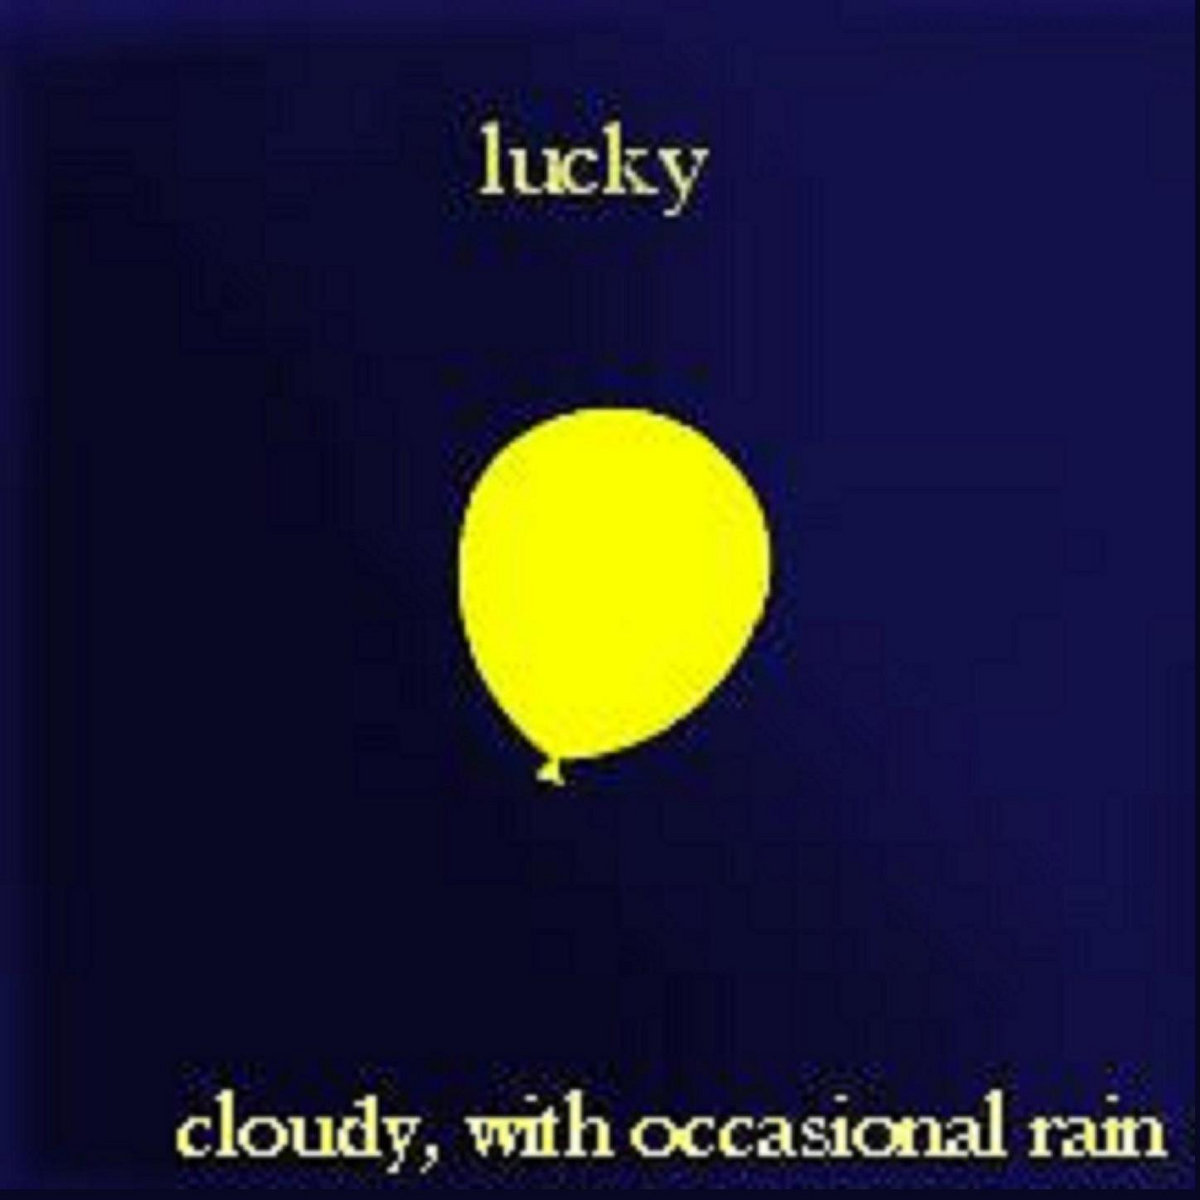 cloudy, with occasional rain - lucky album cover